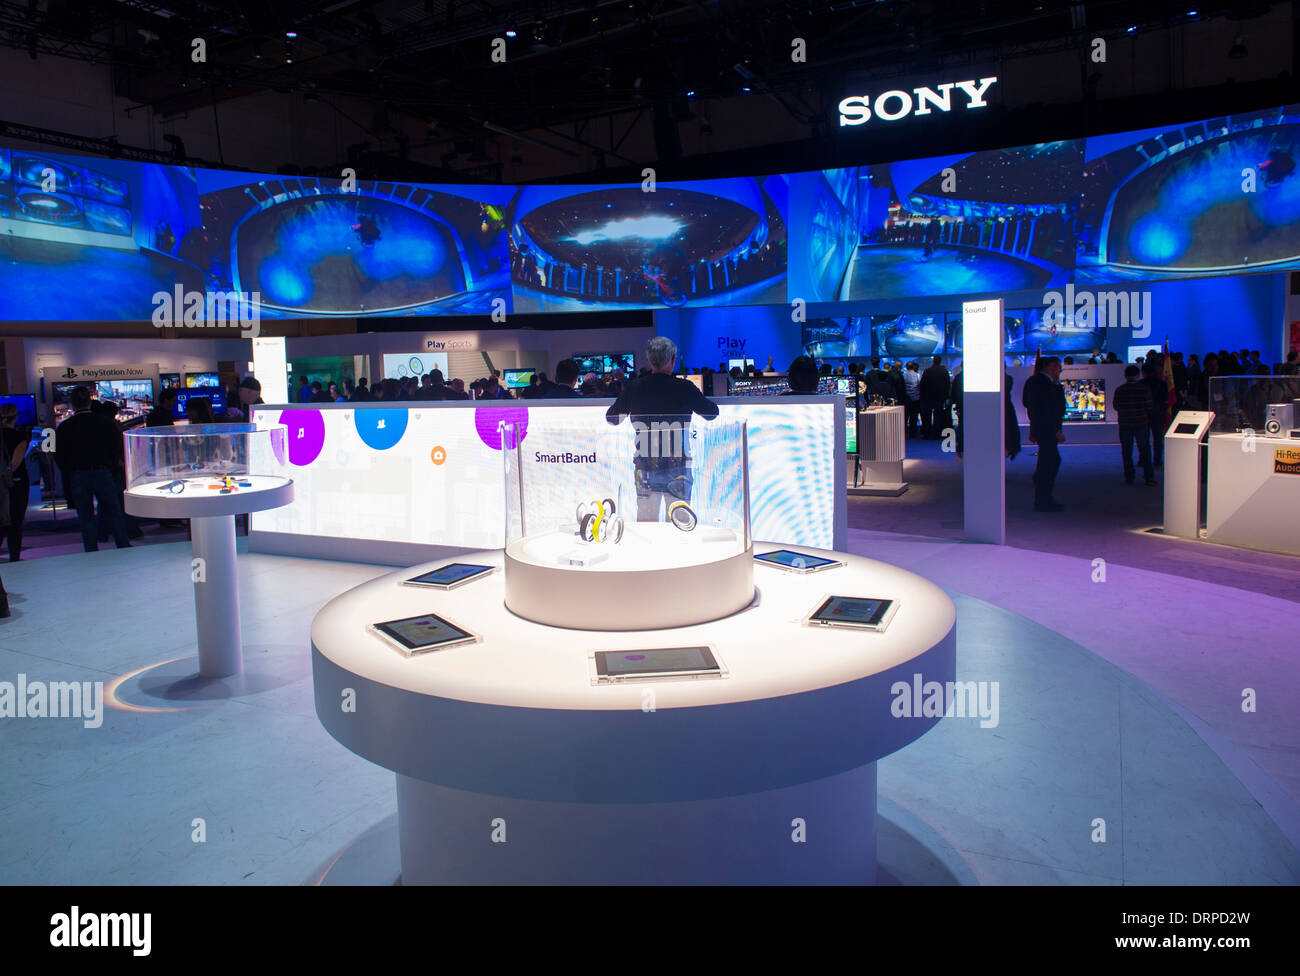 The Sony booth at the CES show in Las Vegas Stock Photo - Alamy